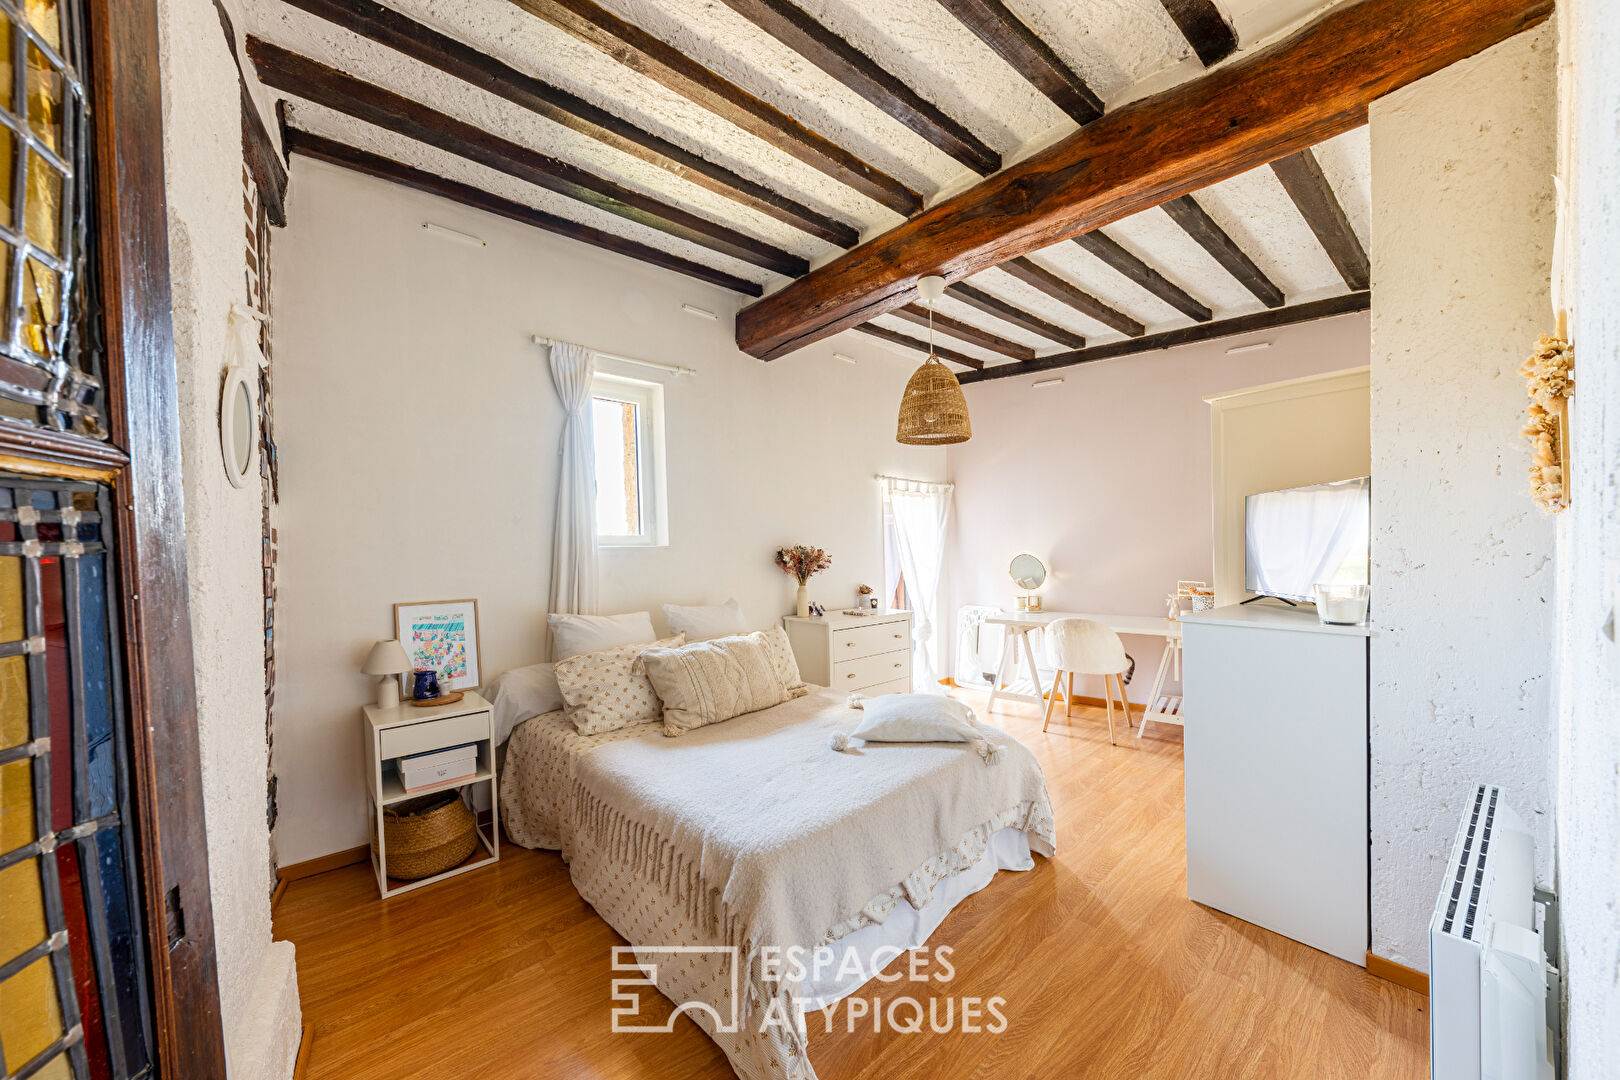 Atypical charm for this historic house in the old center of Buchelay